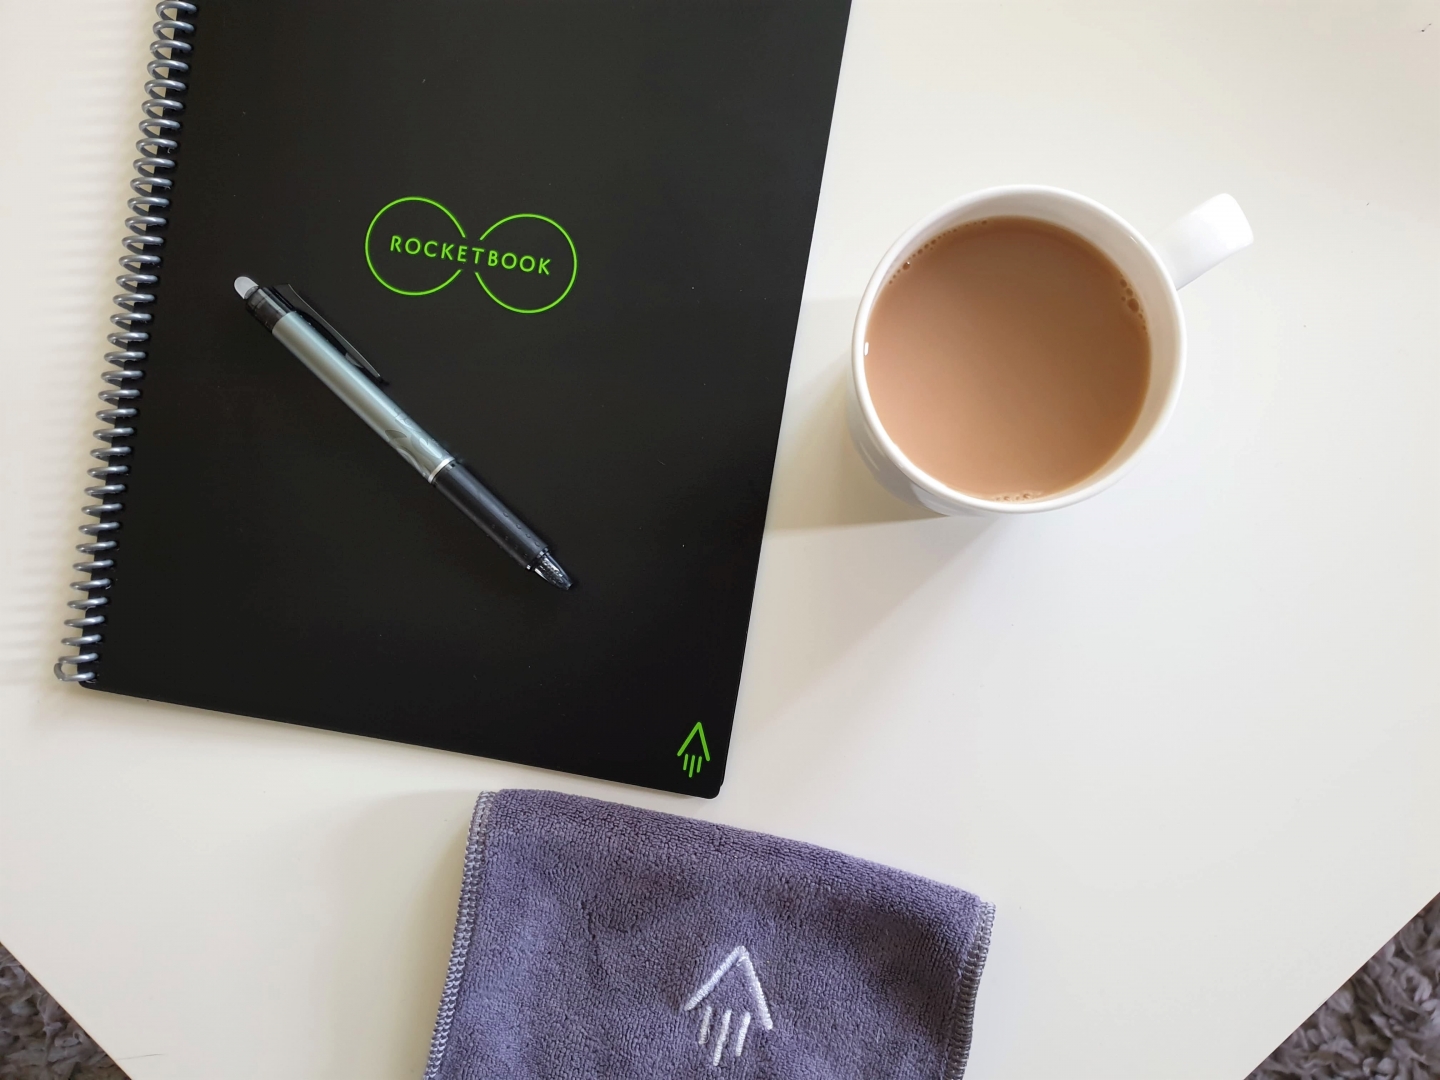 Rocketbook Everlast reusable notebook with cloth, Pilot Frixion pen and cup of tea